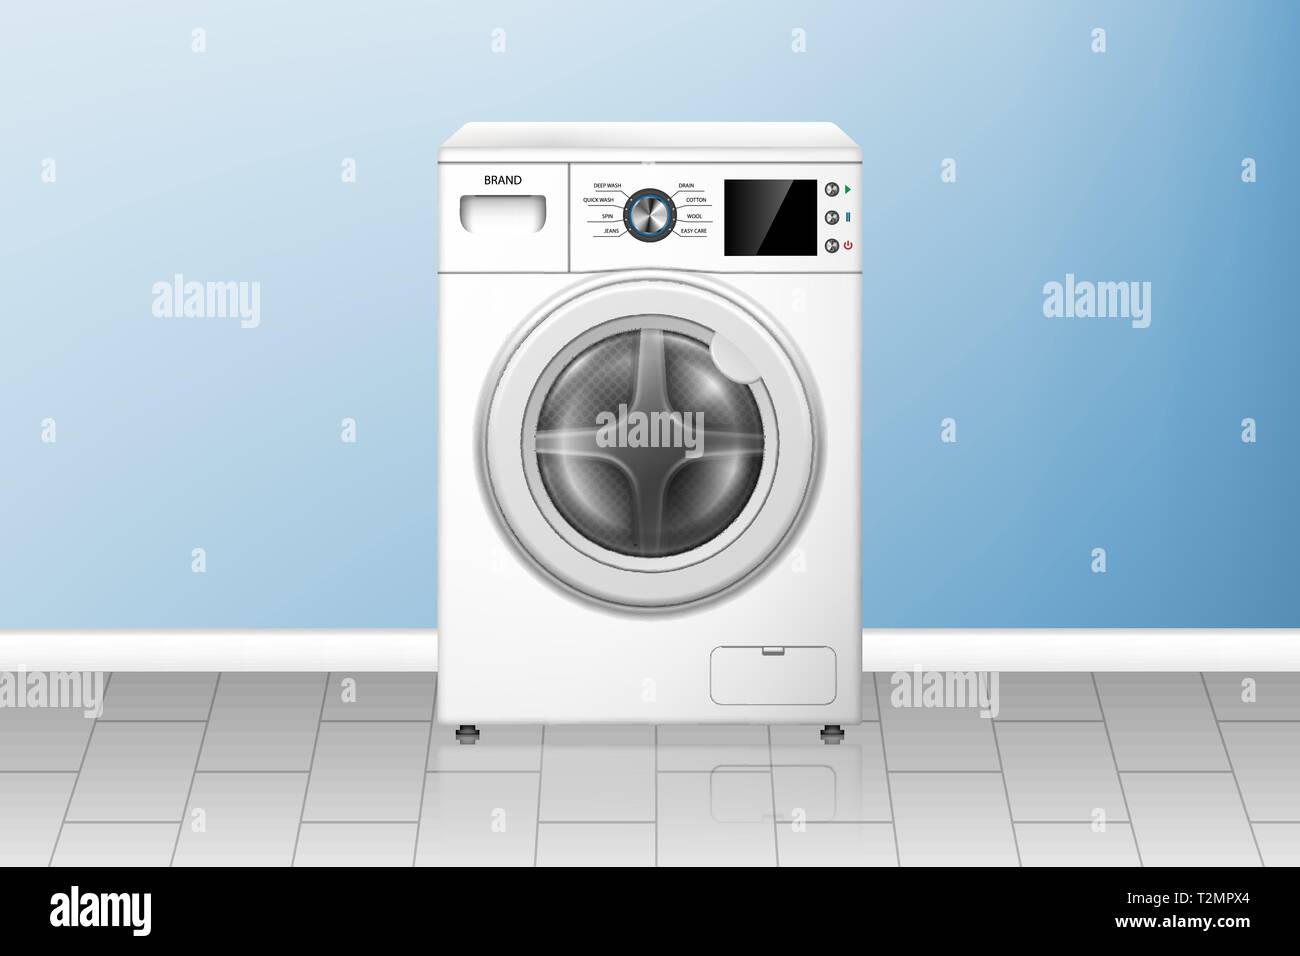 Realistic washing machine in empty laundry room. White washer front view. Modern home appliances. vector illustration Stock Vector